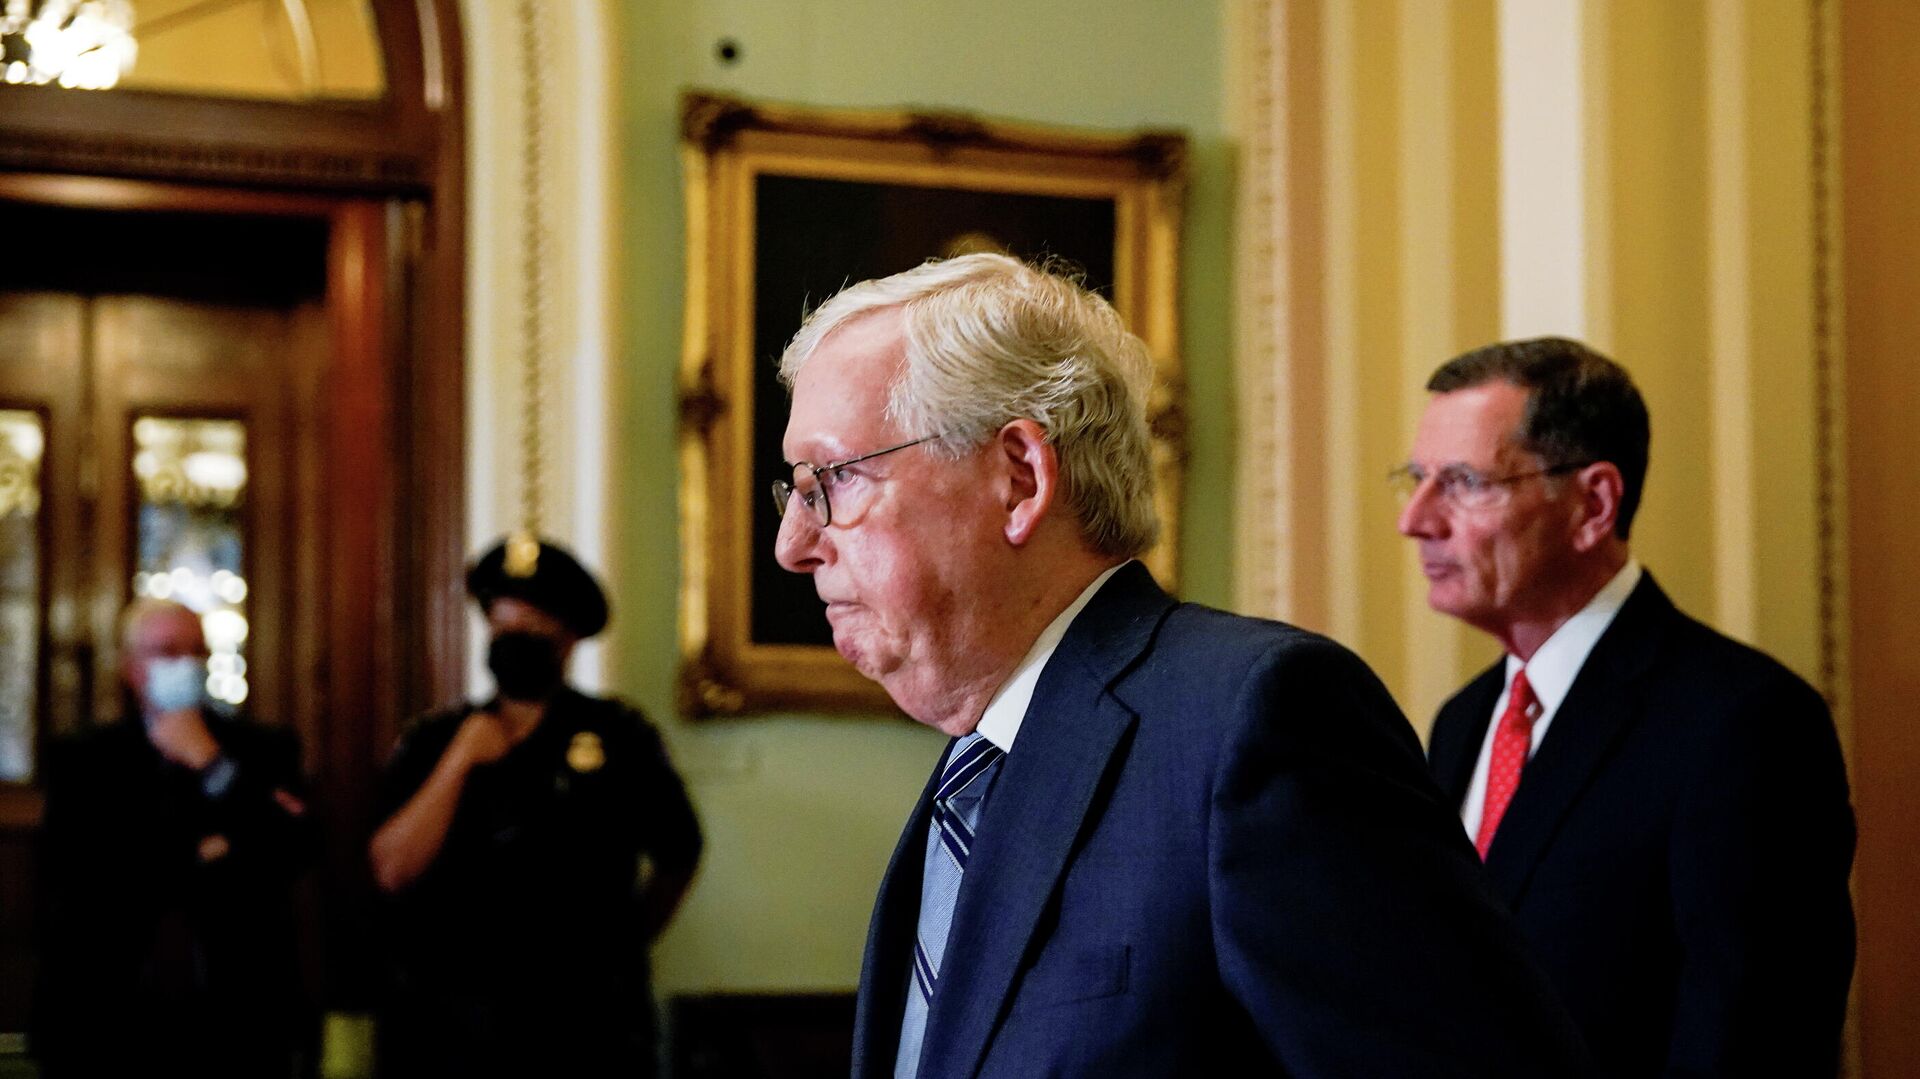 U.S. Senate Republican Leader Mitch McConnell (R-KY) is followed by Senator John Barrasso (R-WY) prior to the Senate Republicans weekly policy lunch at the U.S. Capitol in Washington, U.S., September 28, 2021. - Sputnik International, 1920, 04.10.2021